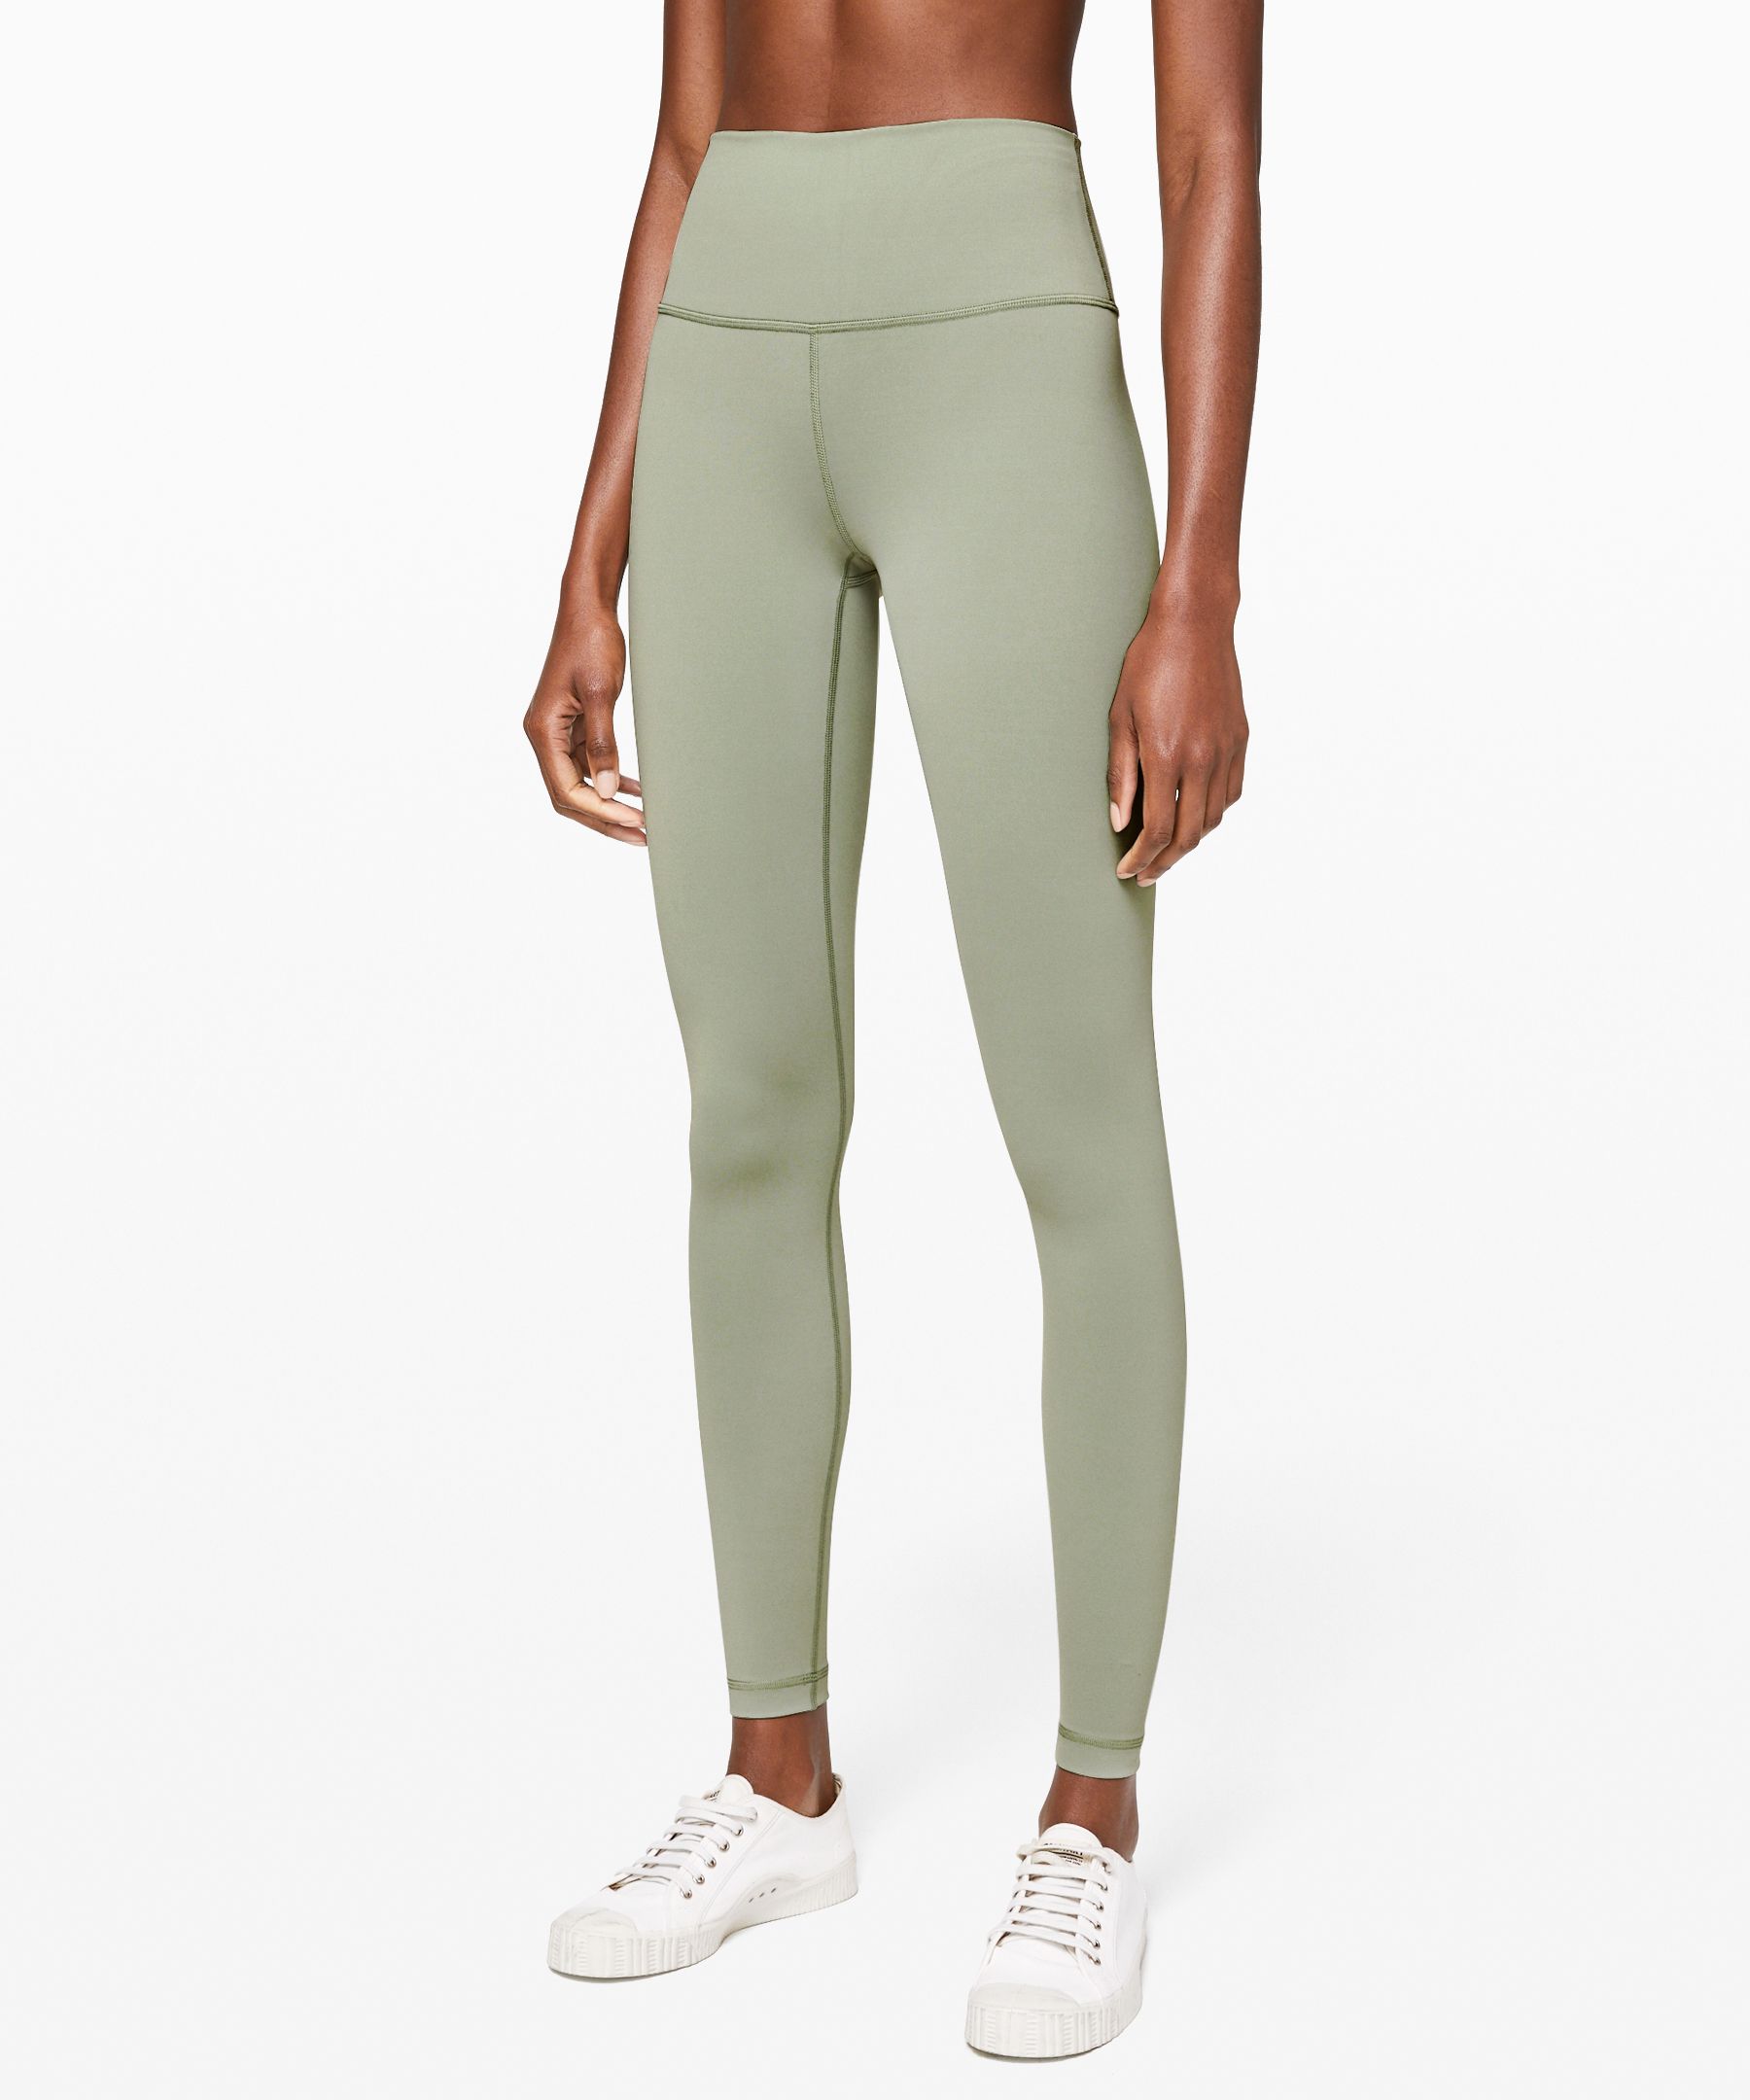 Lululemon Wunder Under High-Rise Tight 28 *Luxtreme - Incognito